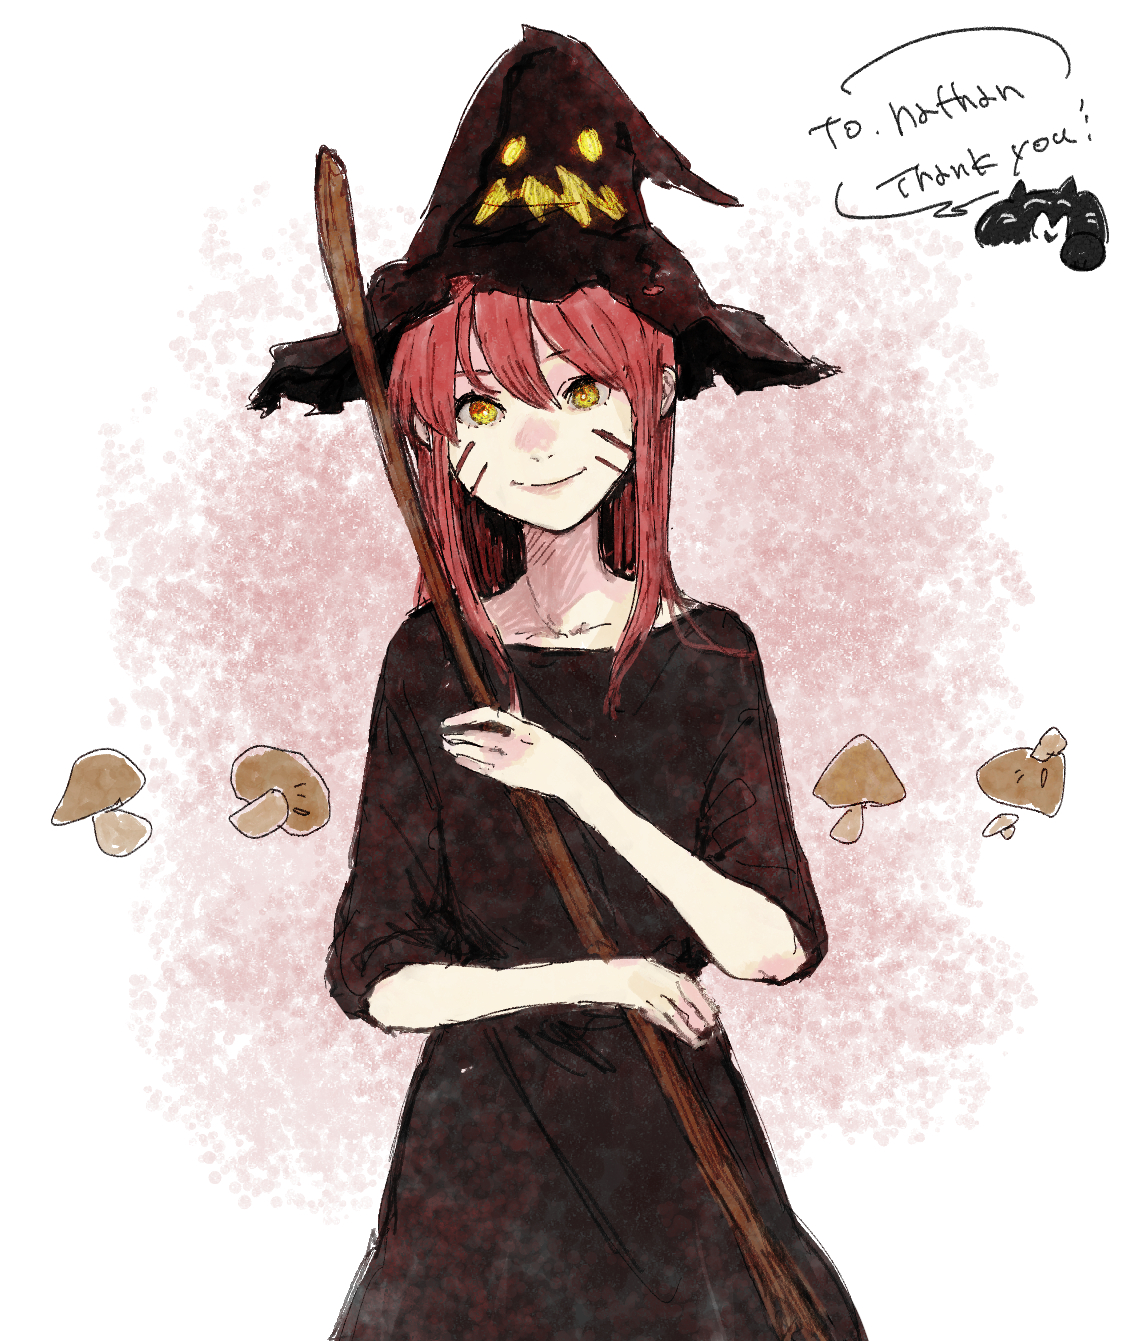 a girl with red hair and yellow eyes wearing a black dress and a black hat with a jack o'lantern face on it, holding a broomstick with mushrooms in the background